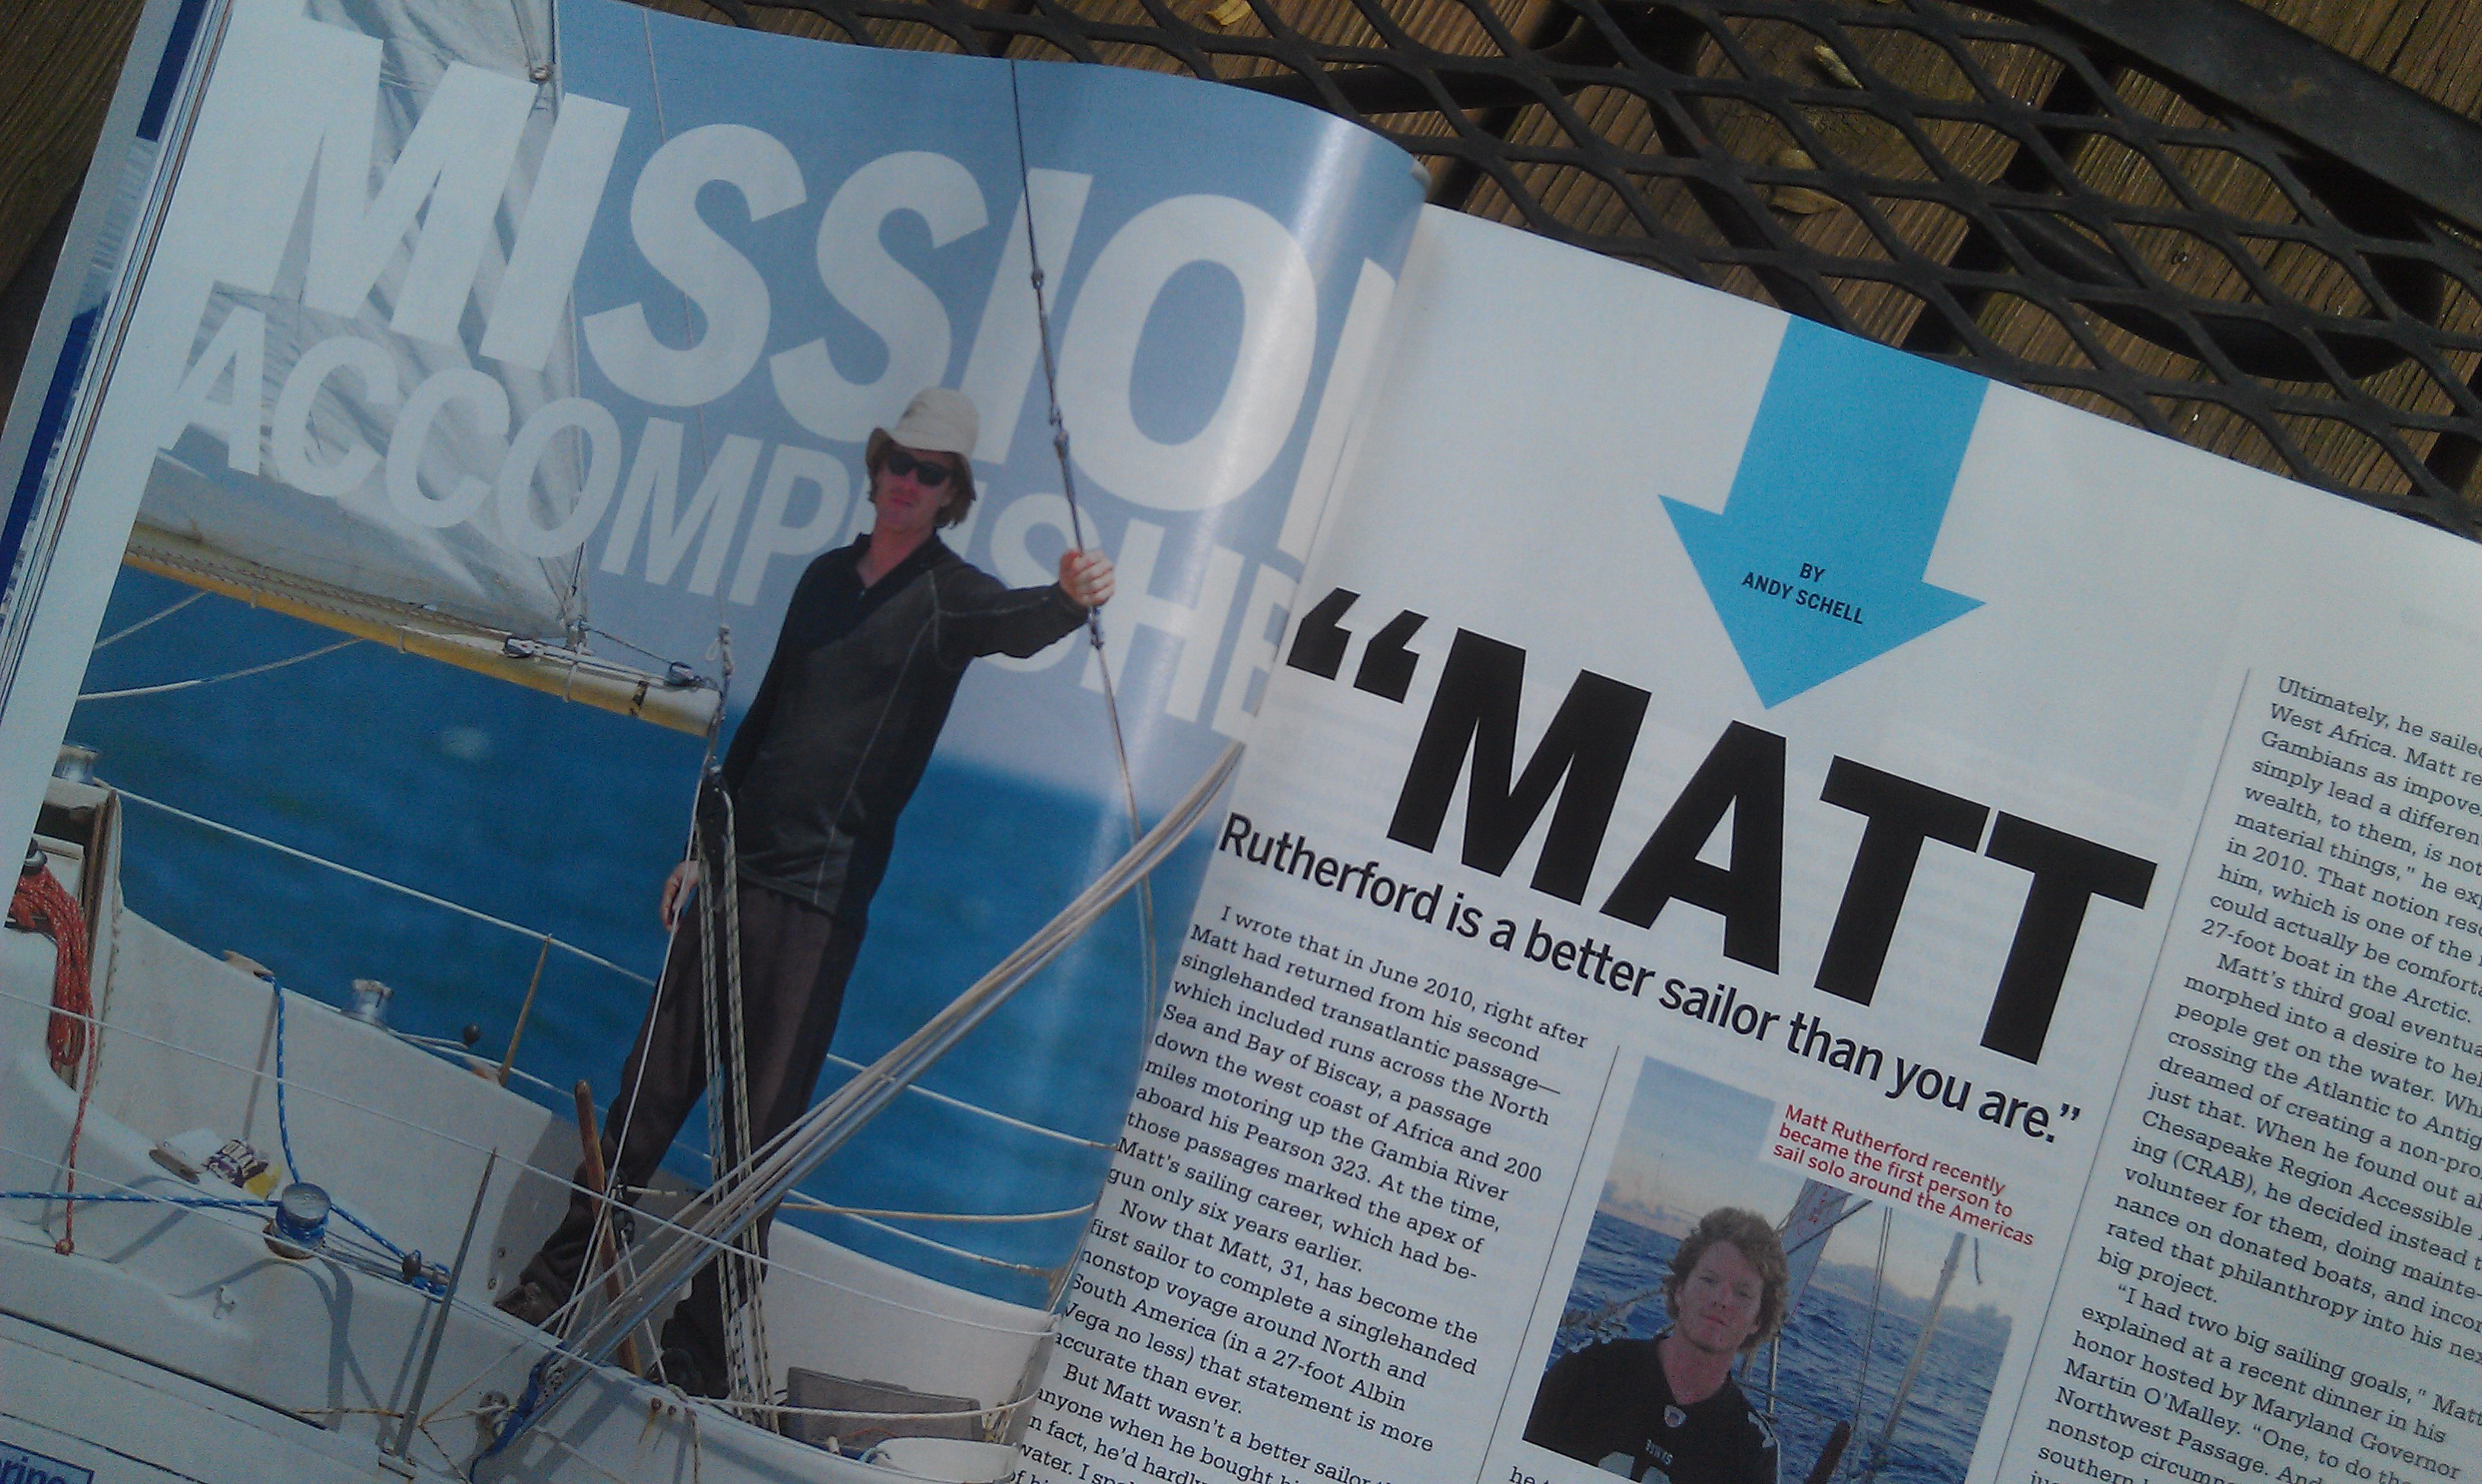 Andy Schell's article about Matt Rutherford's solo, non-stop circumnavigation of the Americas